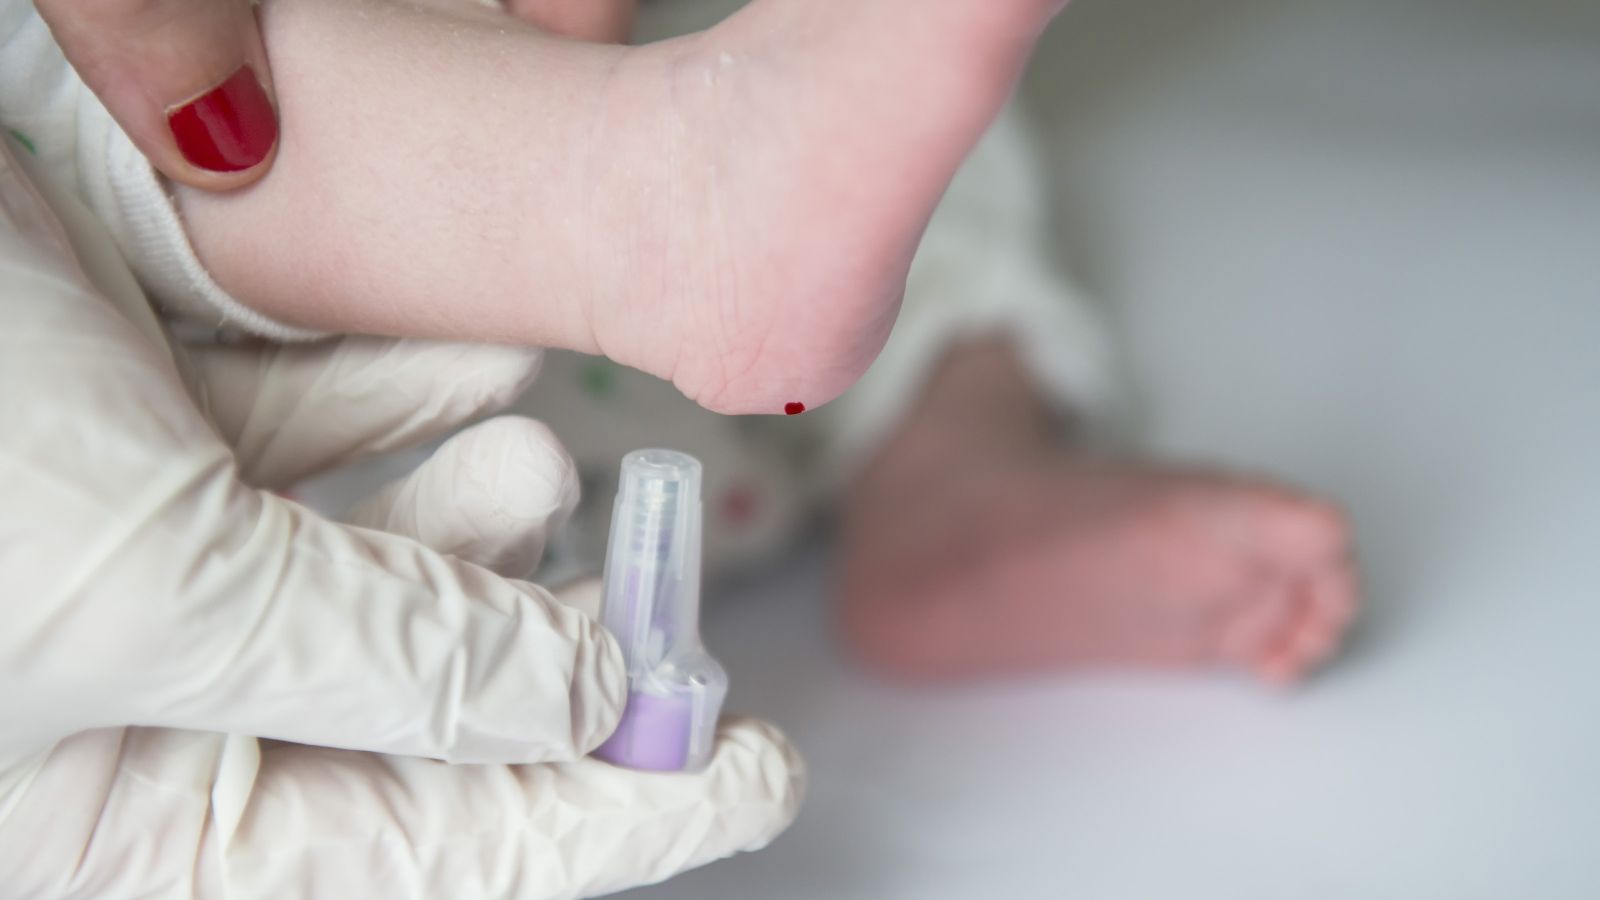 A nurse performs a 'heel prick' test on a baby